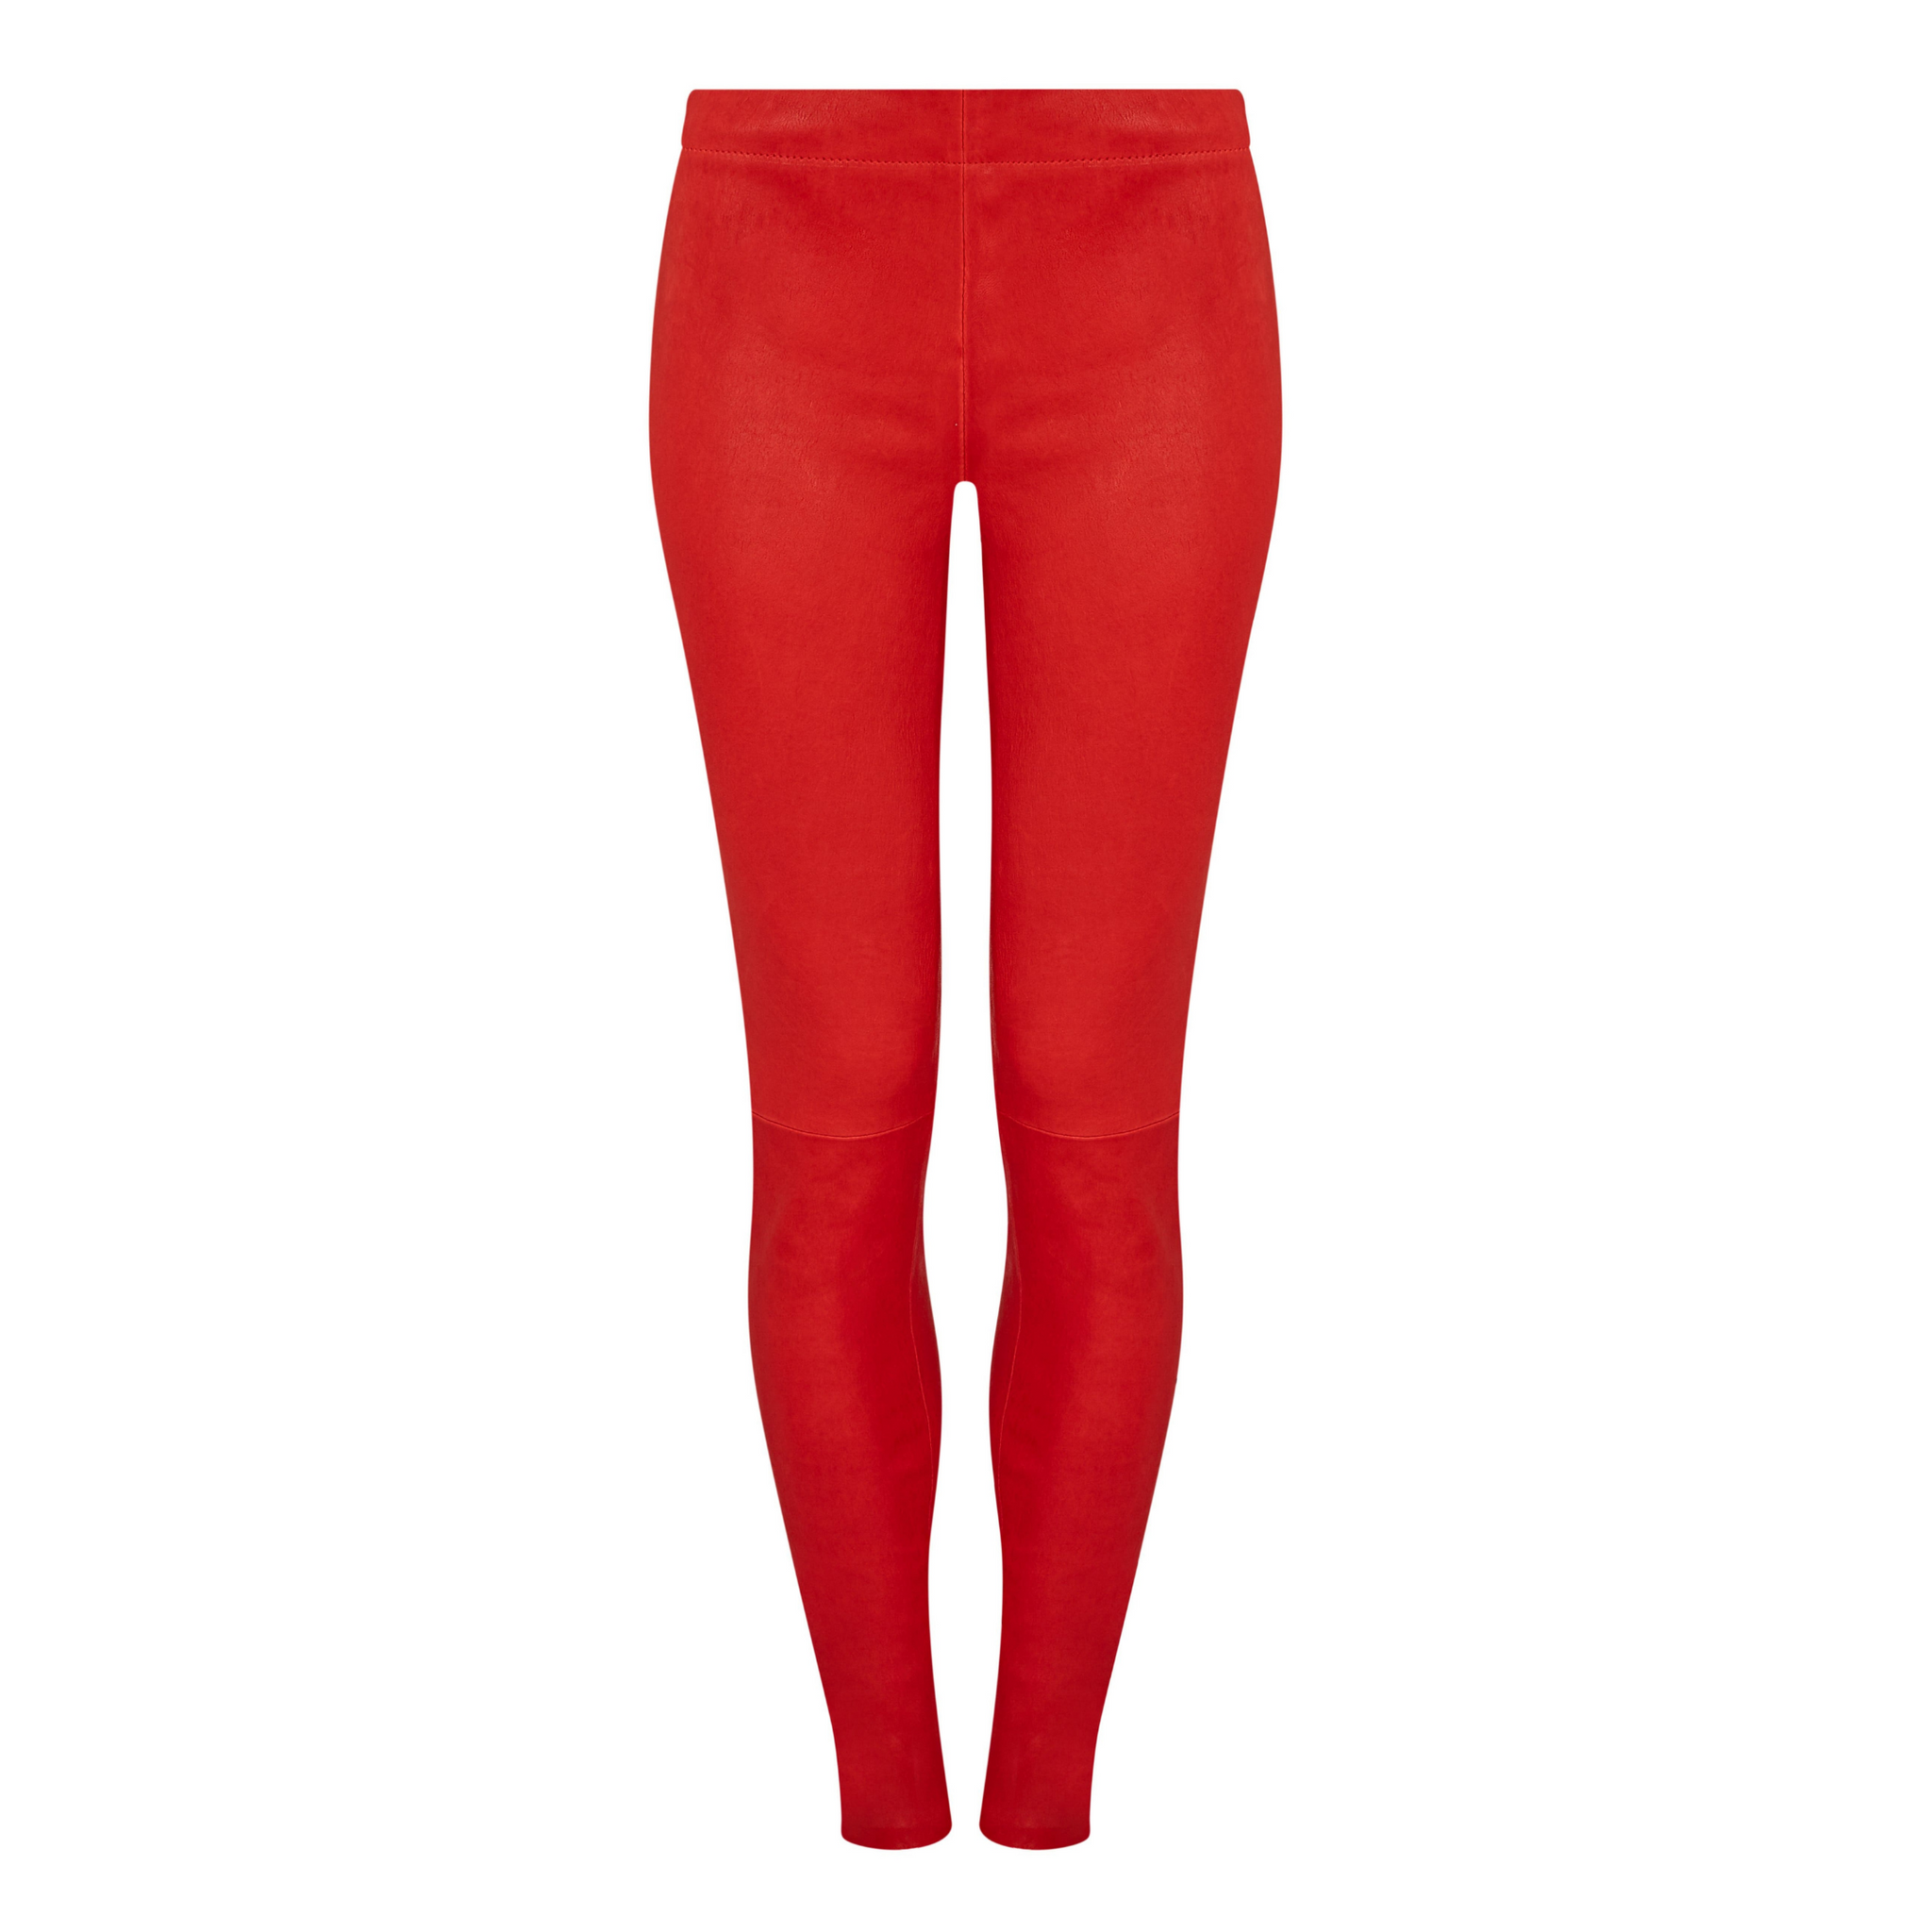 Legging Leather Effect High Waist Red Color